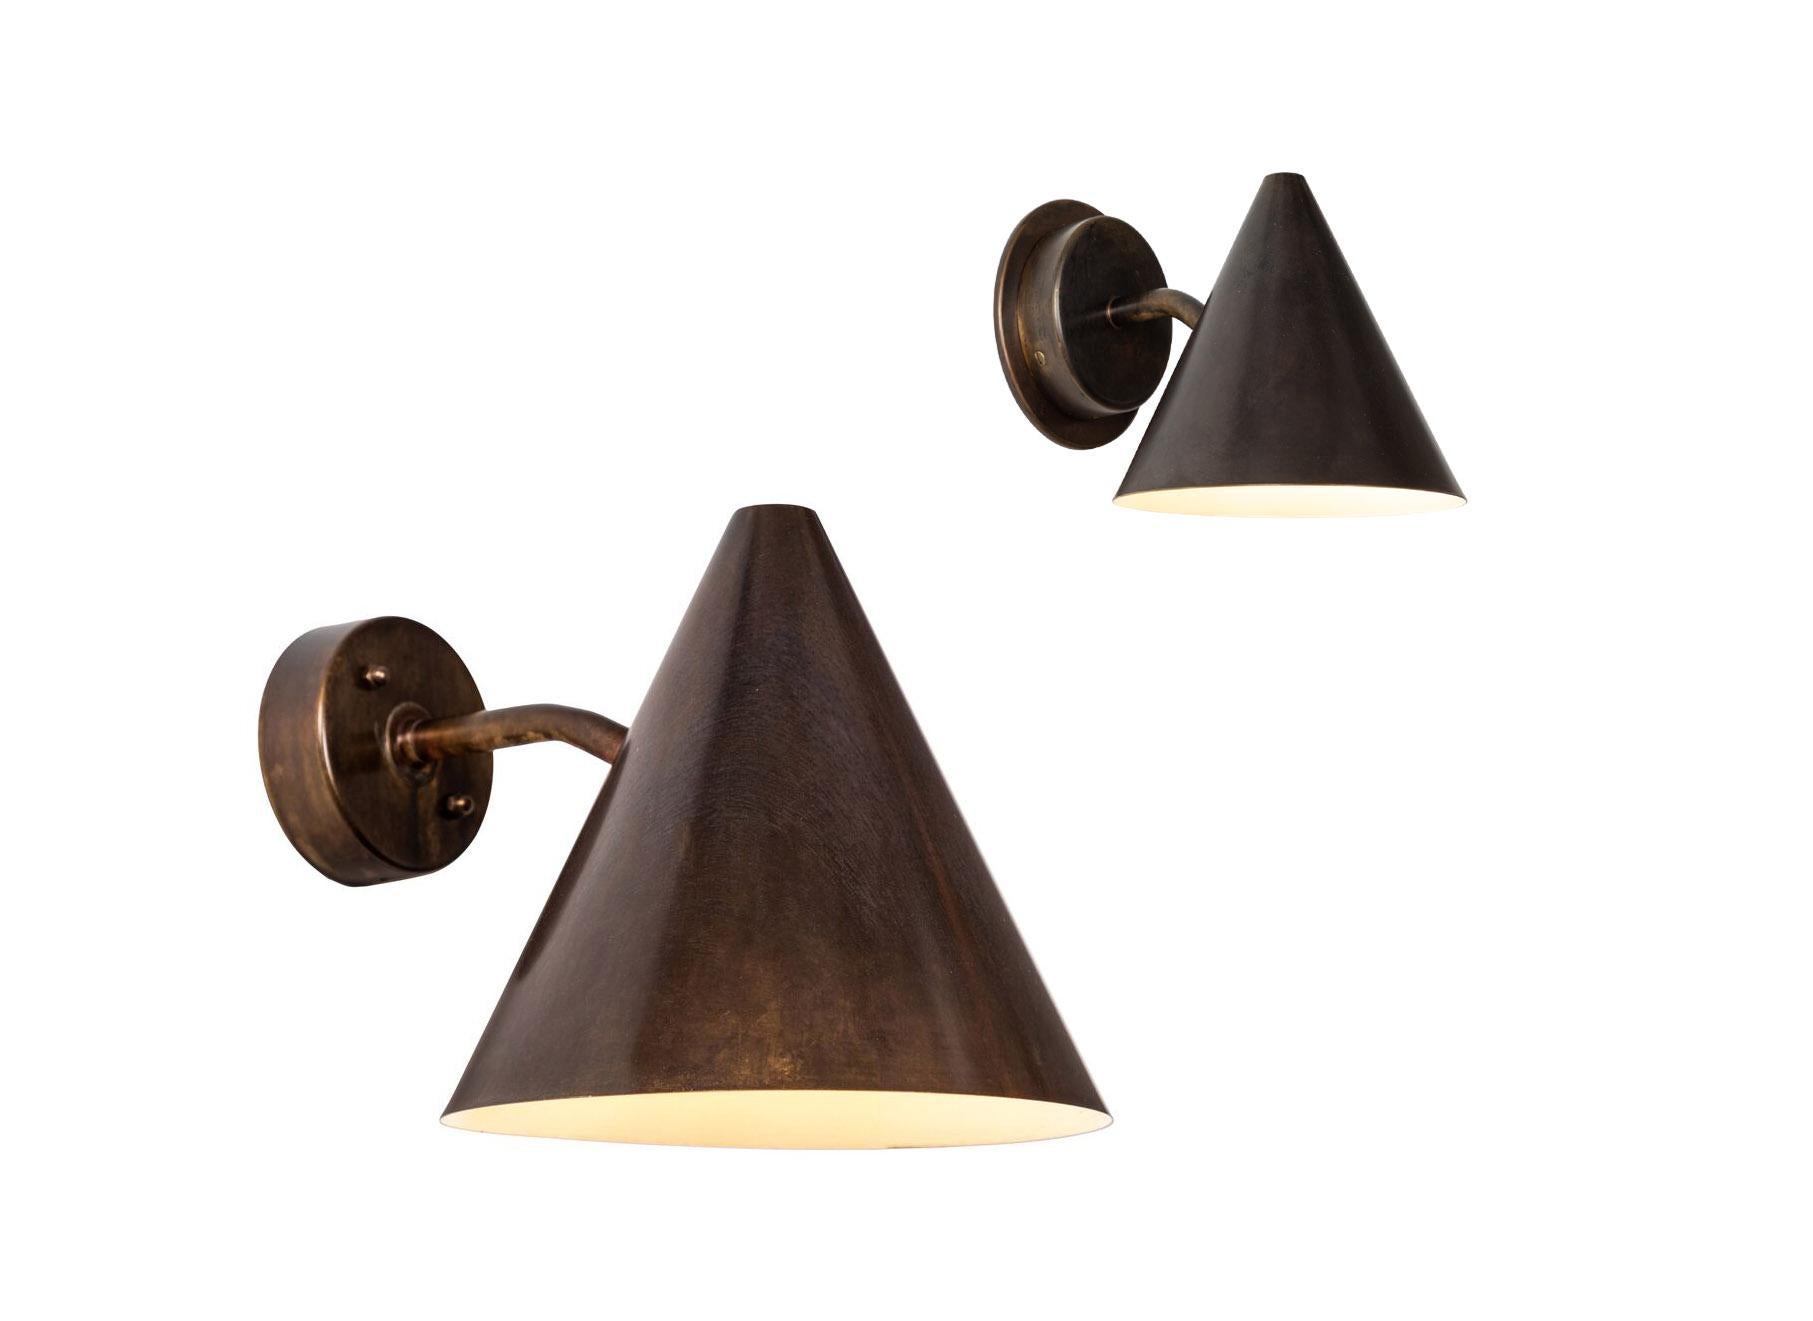 Hans-Agne Jakobsson 'Mini-Tratten' dark brown patinated outdoor sconce. A smaller scale version of the Classic Swedish outdoor wall lamp executed in richly patinated metal with white painted interior. An incredibly refined design that is